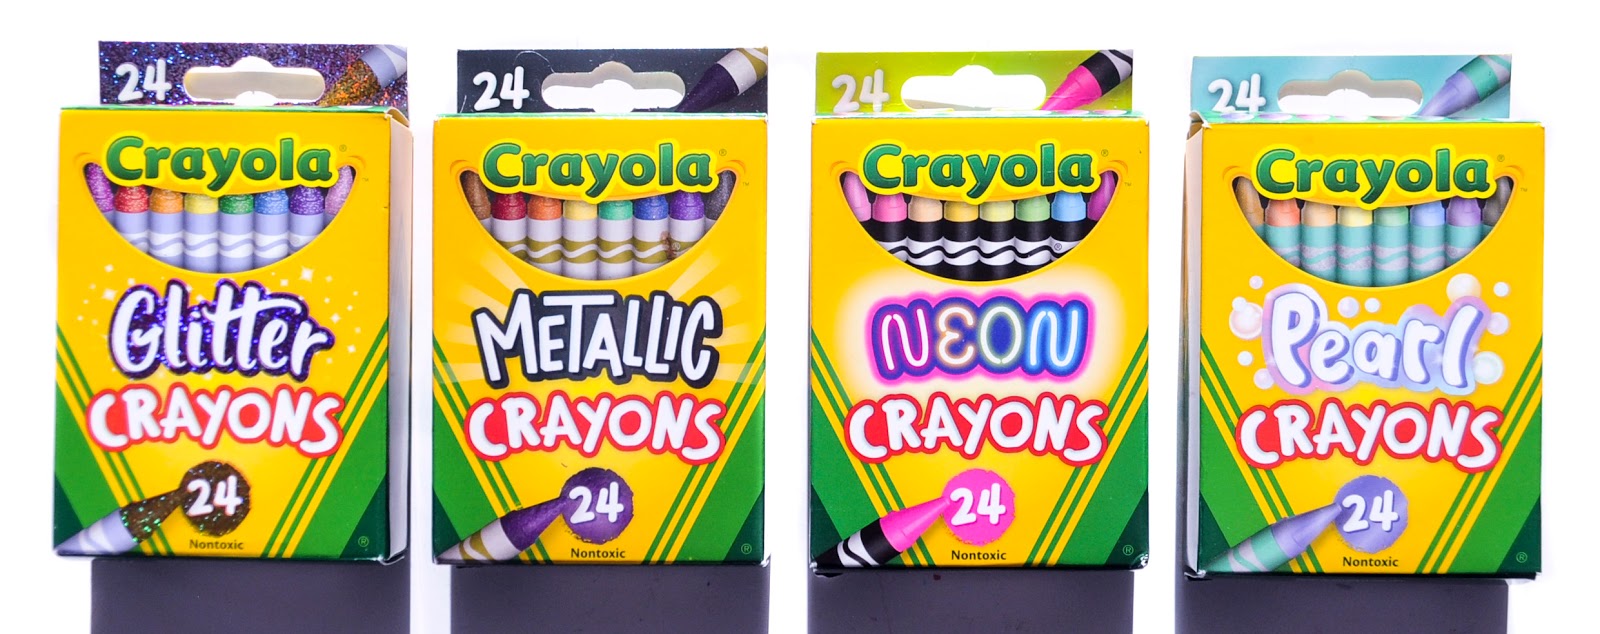 NEW Crayola Clicks Markers: Color Names and How to Use 